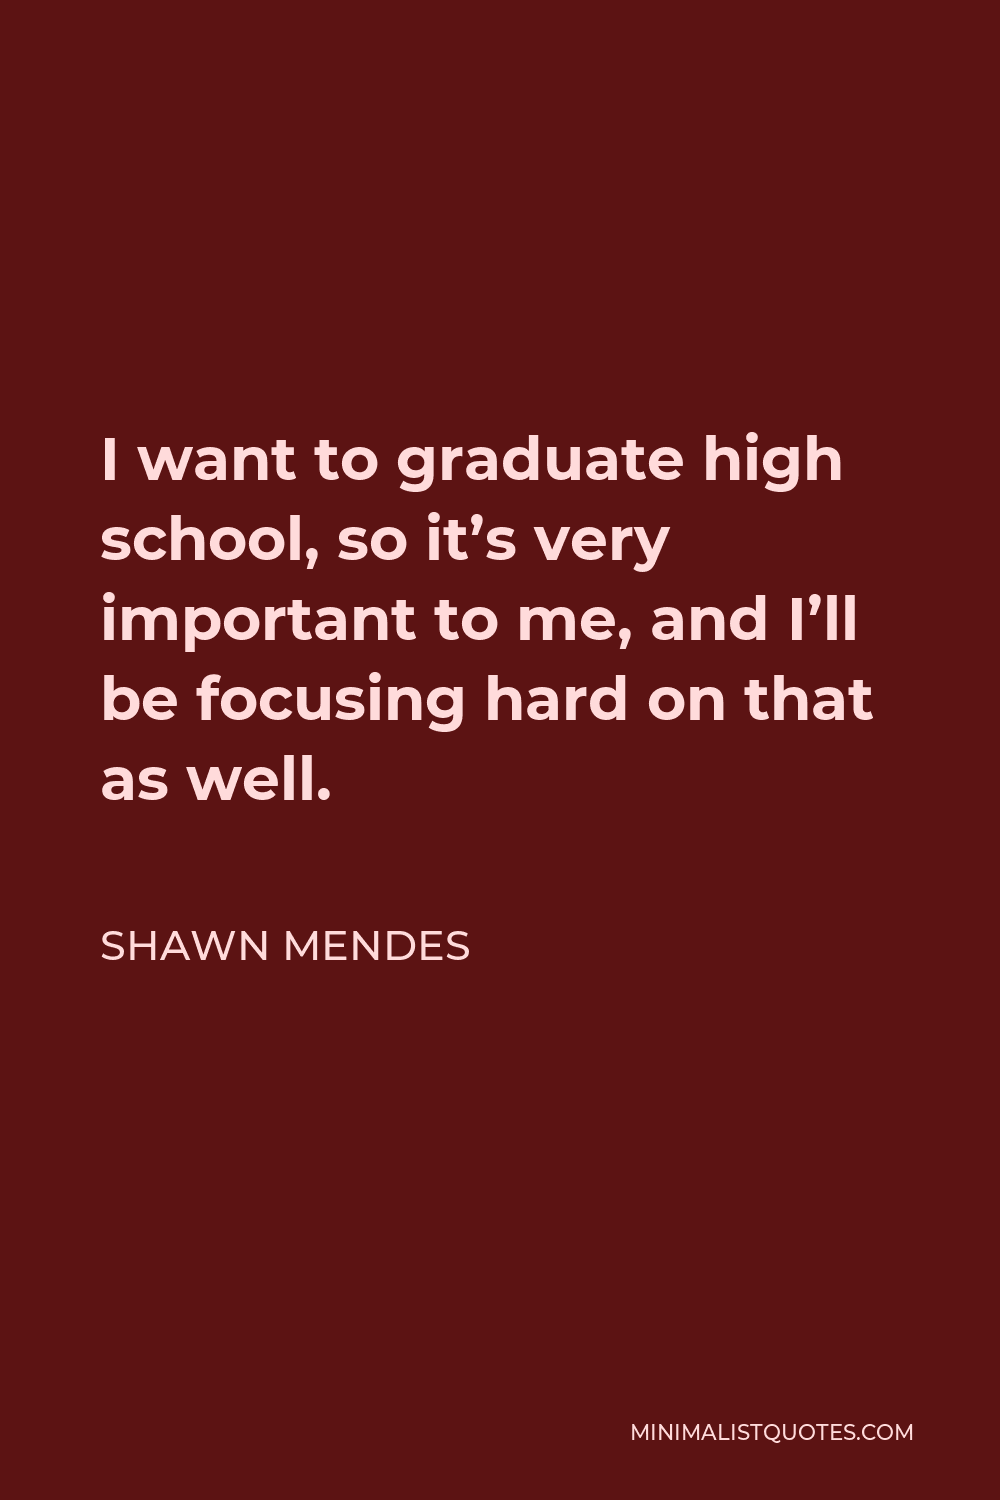 Shawn Mendes Quote - I want to graduate high school, so it’s very important to me, and I’ll be focusing hard on that as well.